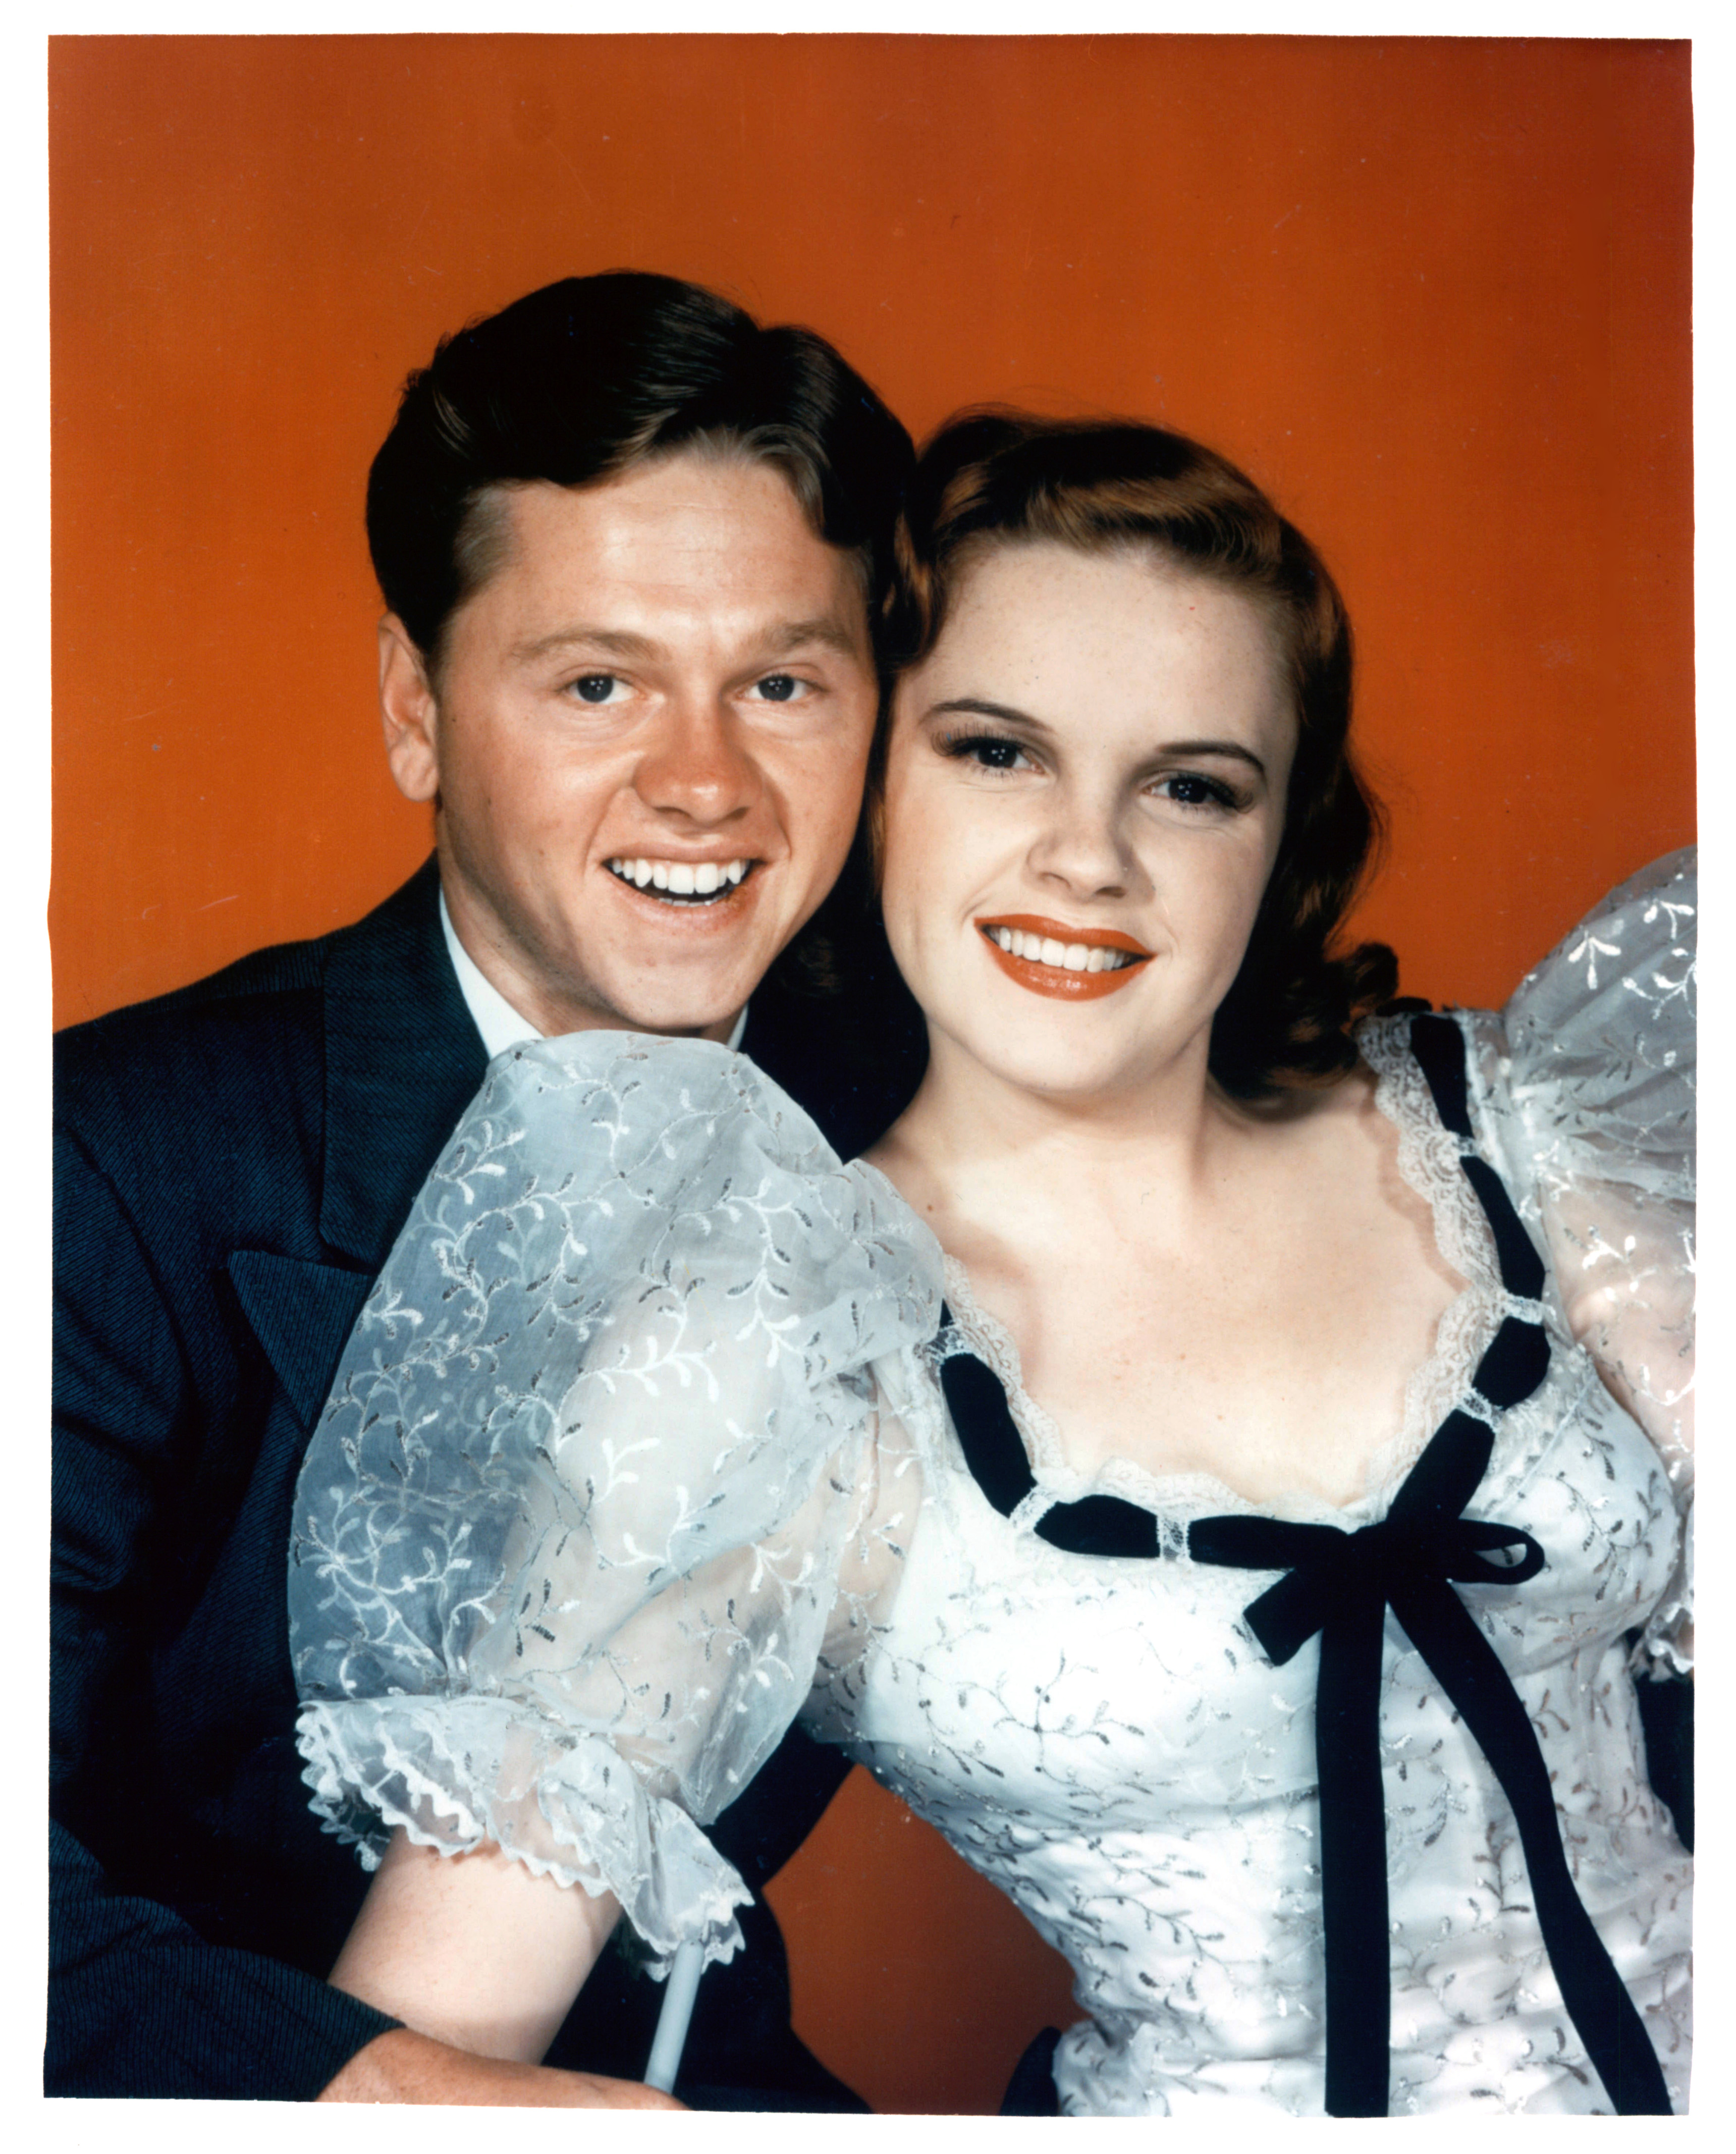 Mickey Rooney and Judy Garland in a publicity portrait for the film 'Strike Up The Band,' 1940. (Photo: Metro-Goldwyn-Mayer/Getty Images)